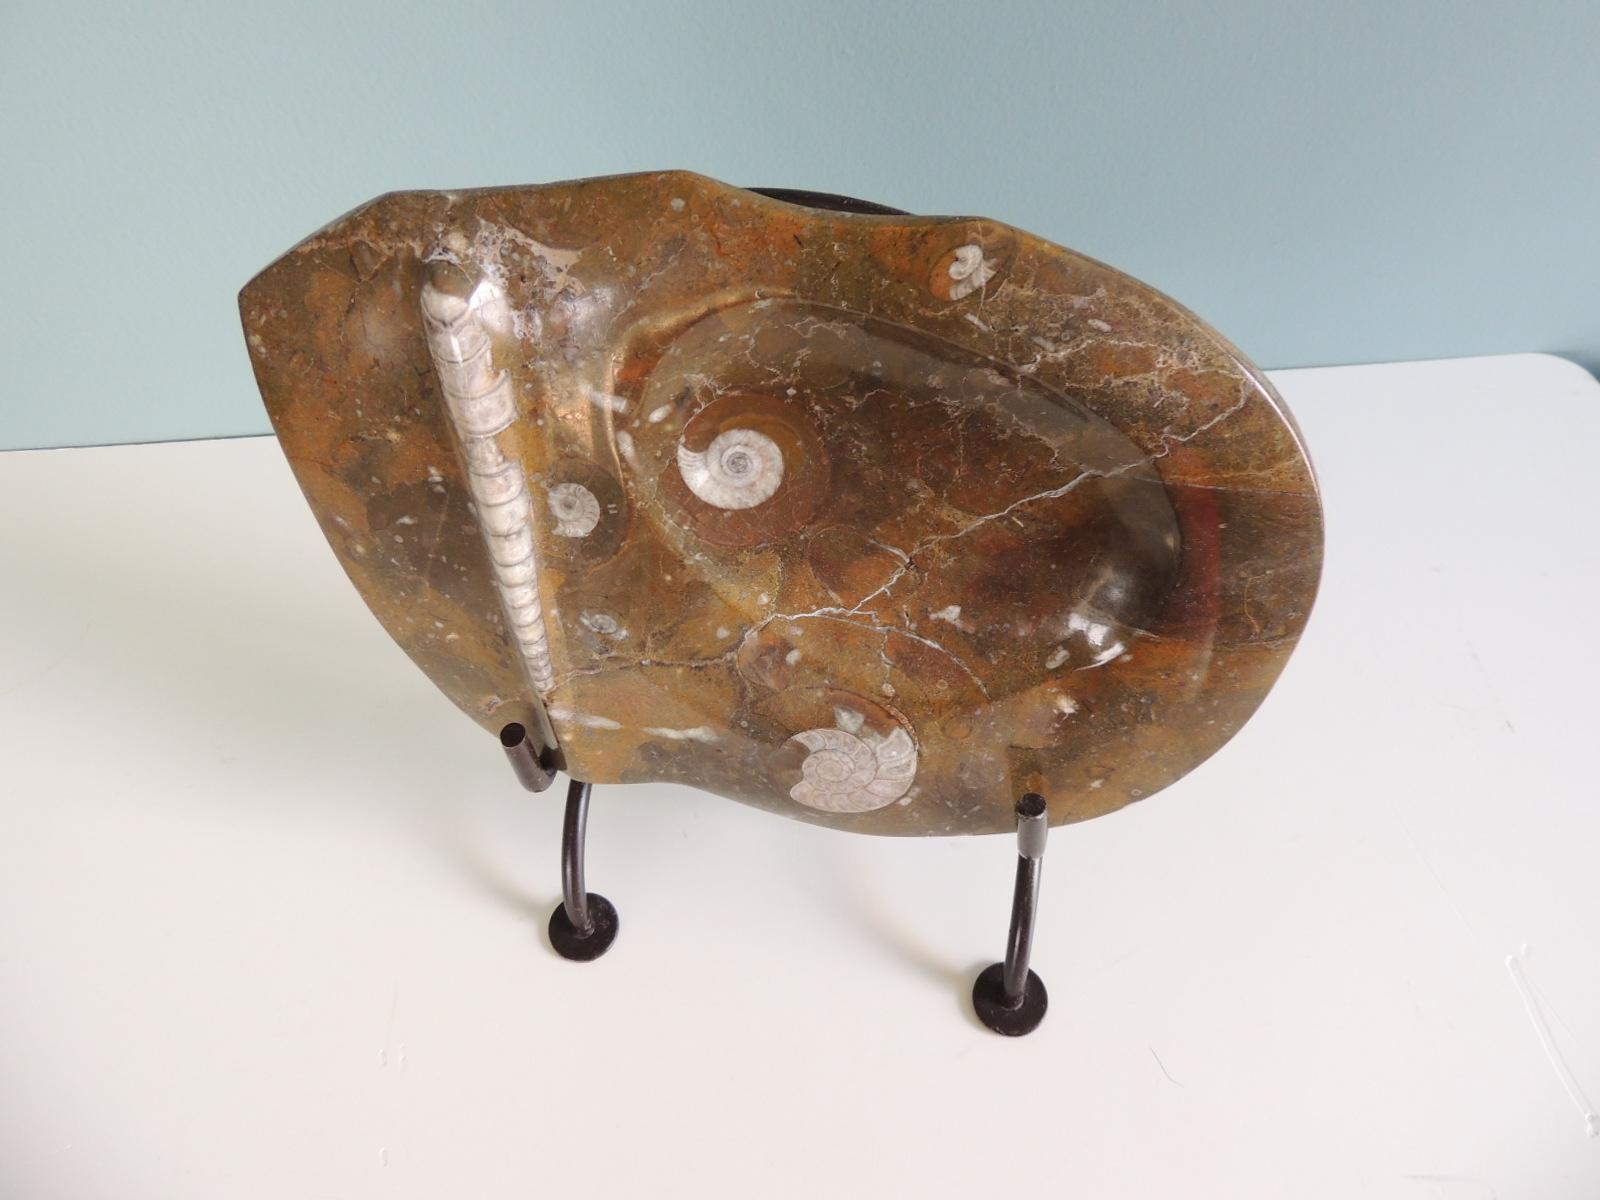 Hand-Crafted Goniatite Moroccan Stone Fossil with Sea Shells on Stand